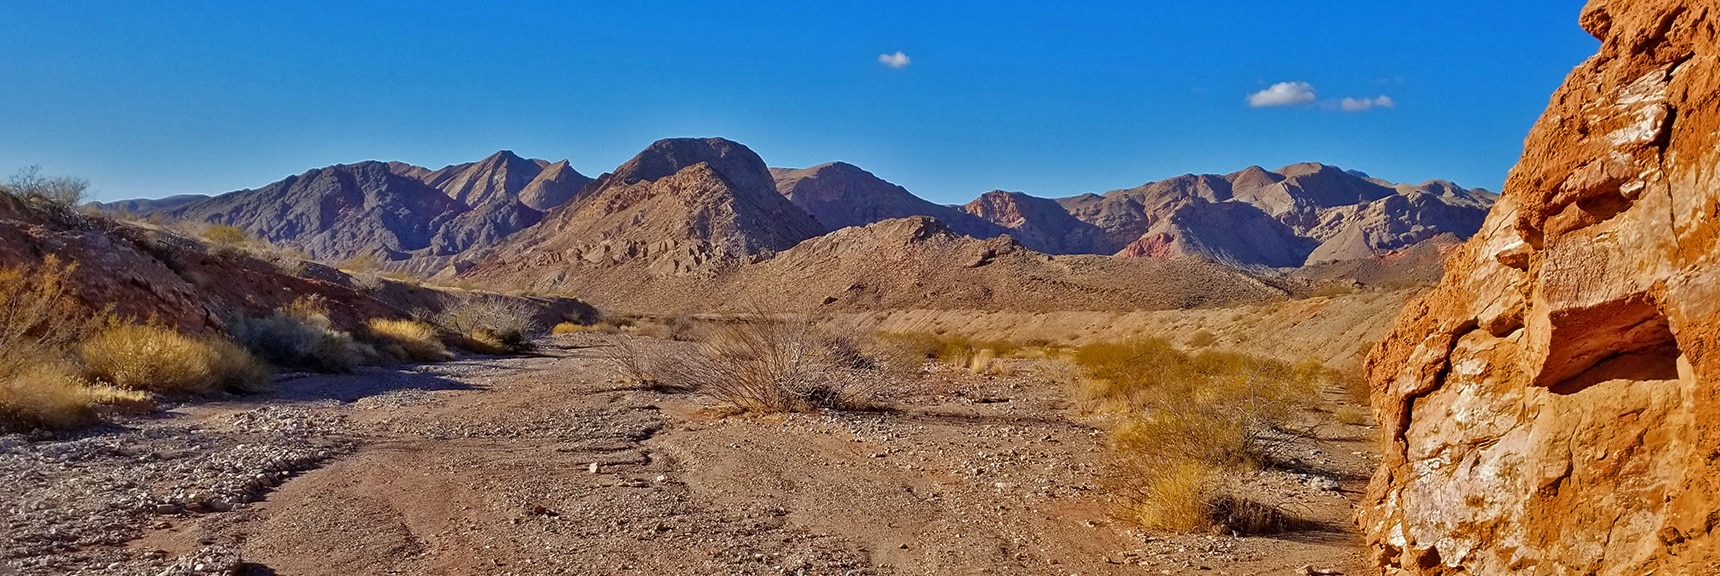 View of the Muddy Mts. as the Wash Opens Just East of Northshore Mile 18 | Hamblin Mountain, Lake Mead National Conservation Area, Nevada